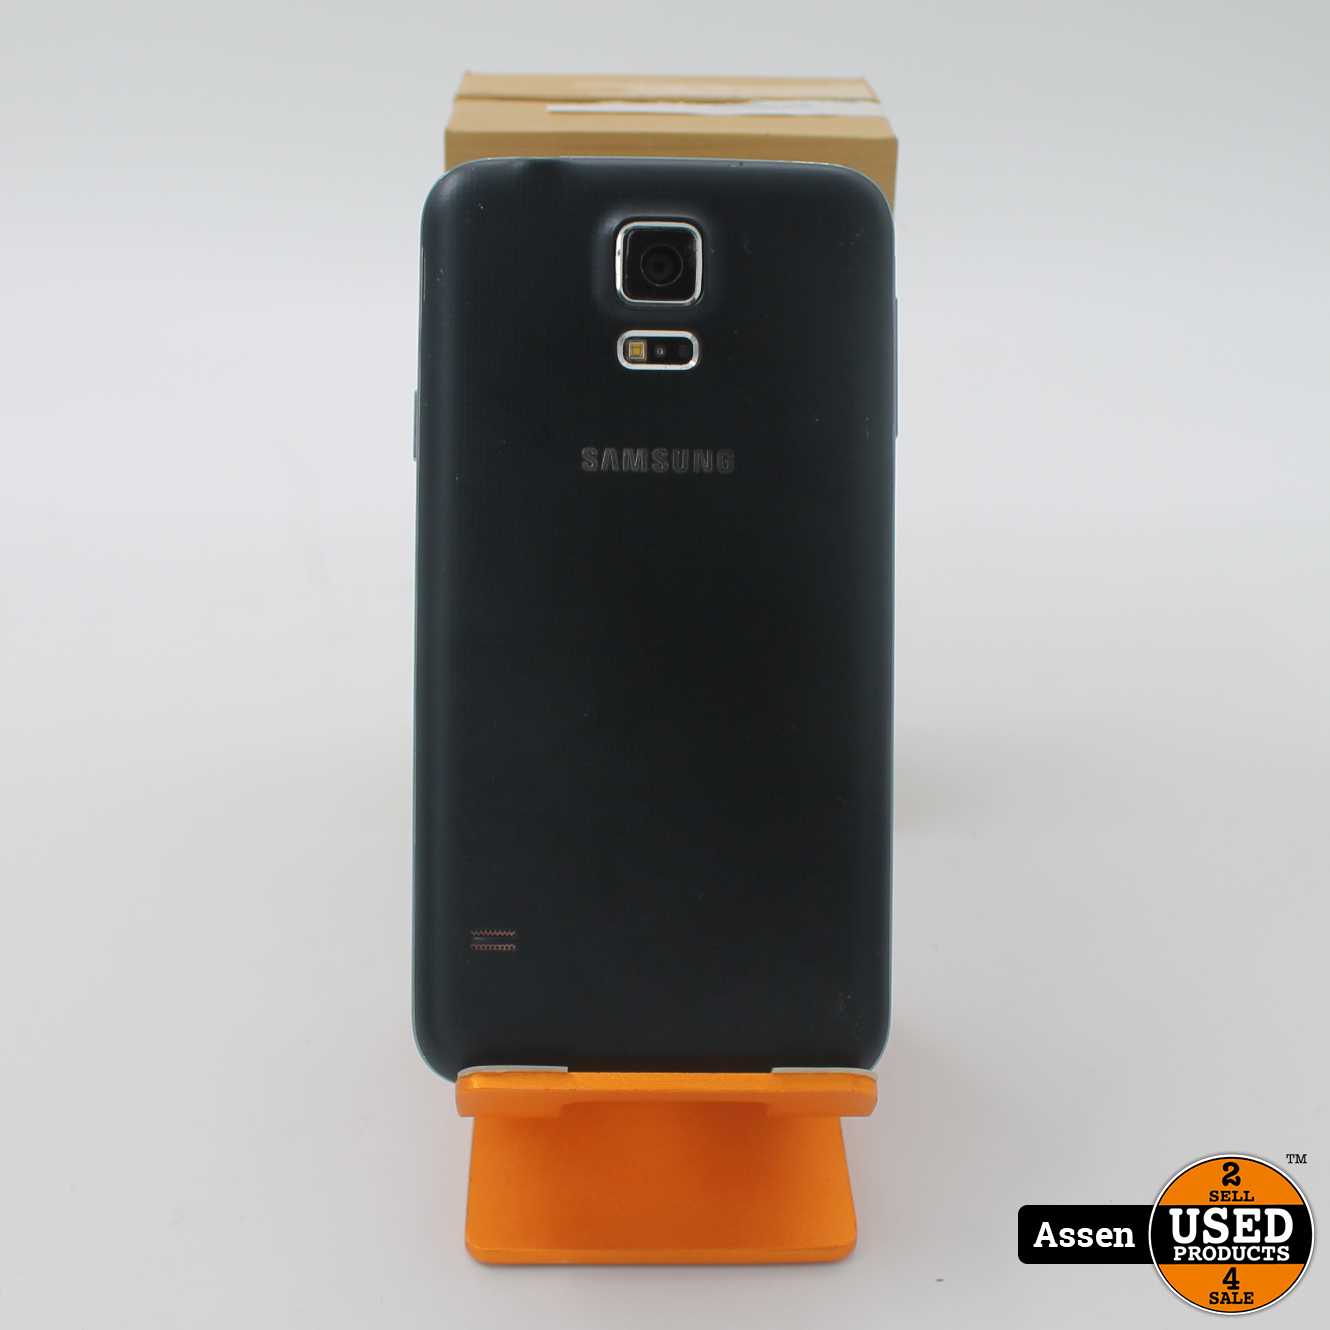 samsung Samsung Galaxy s5 Neo || Nette - Used Products Assen